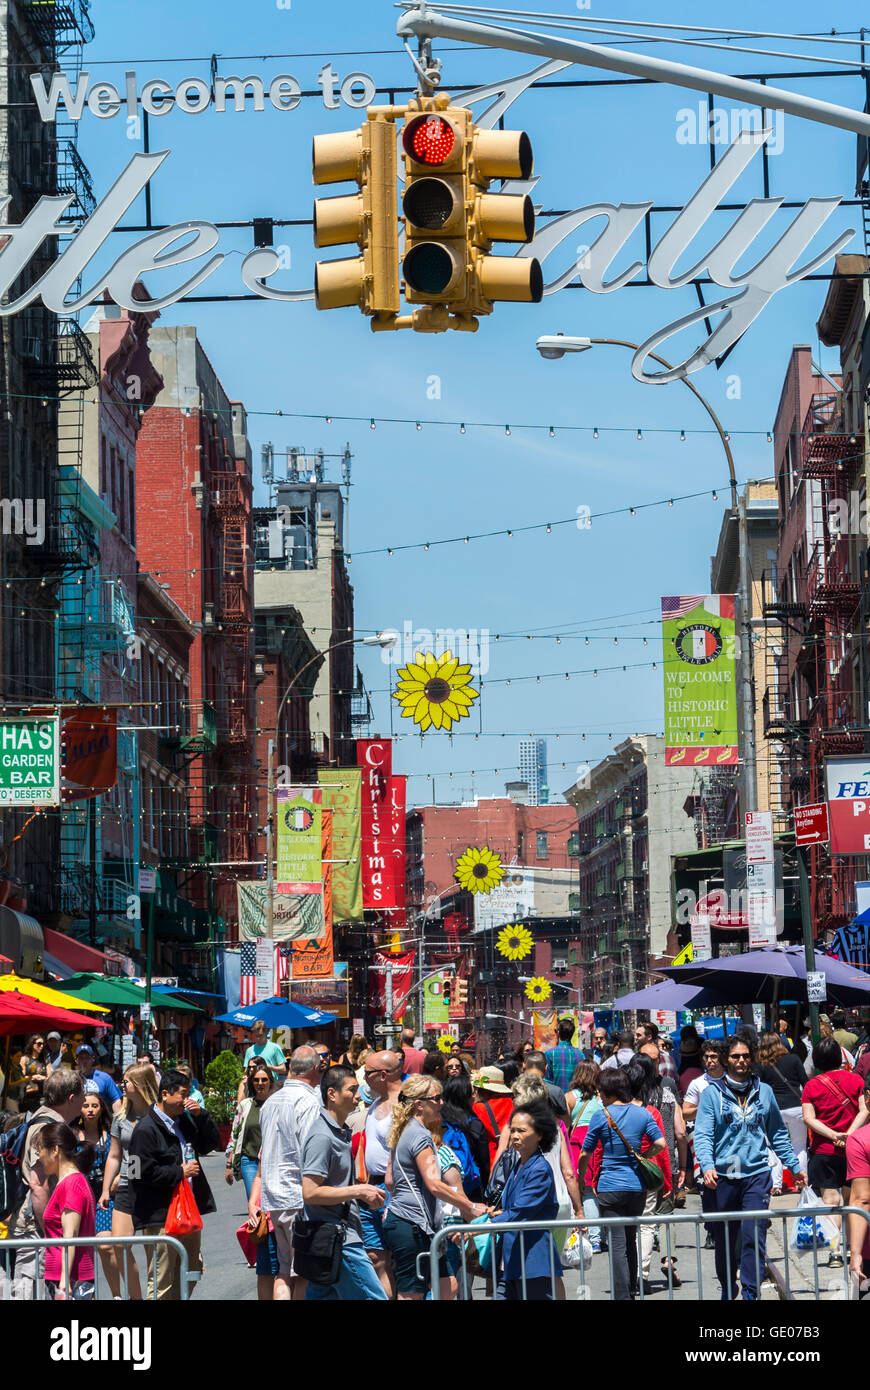 New York City, NY, USA, Chinese Large Crowd of People Walking on Street in Chinatown Neighborhood, Manhattan, Mulberry Street, Stop Light Stock Photo